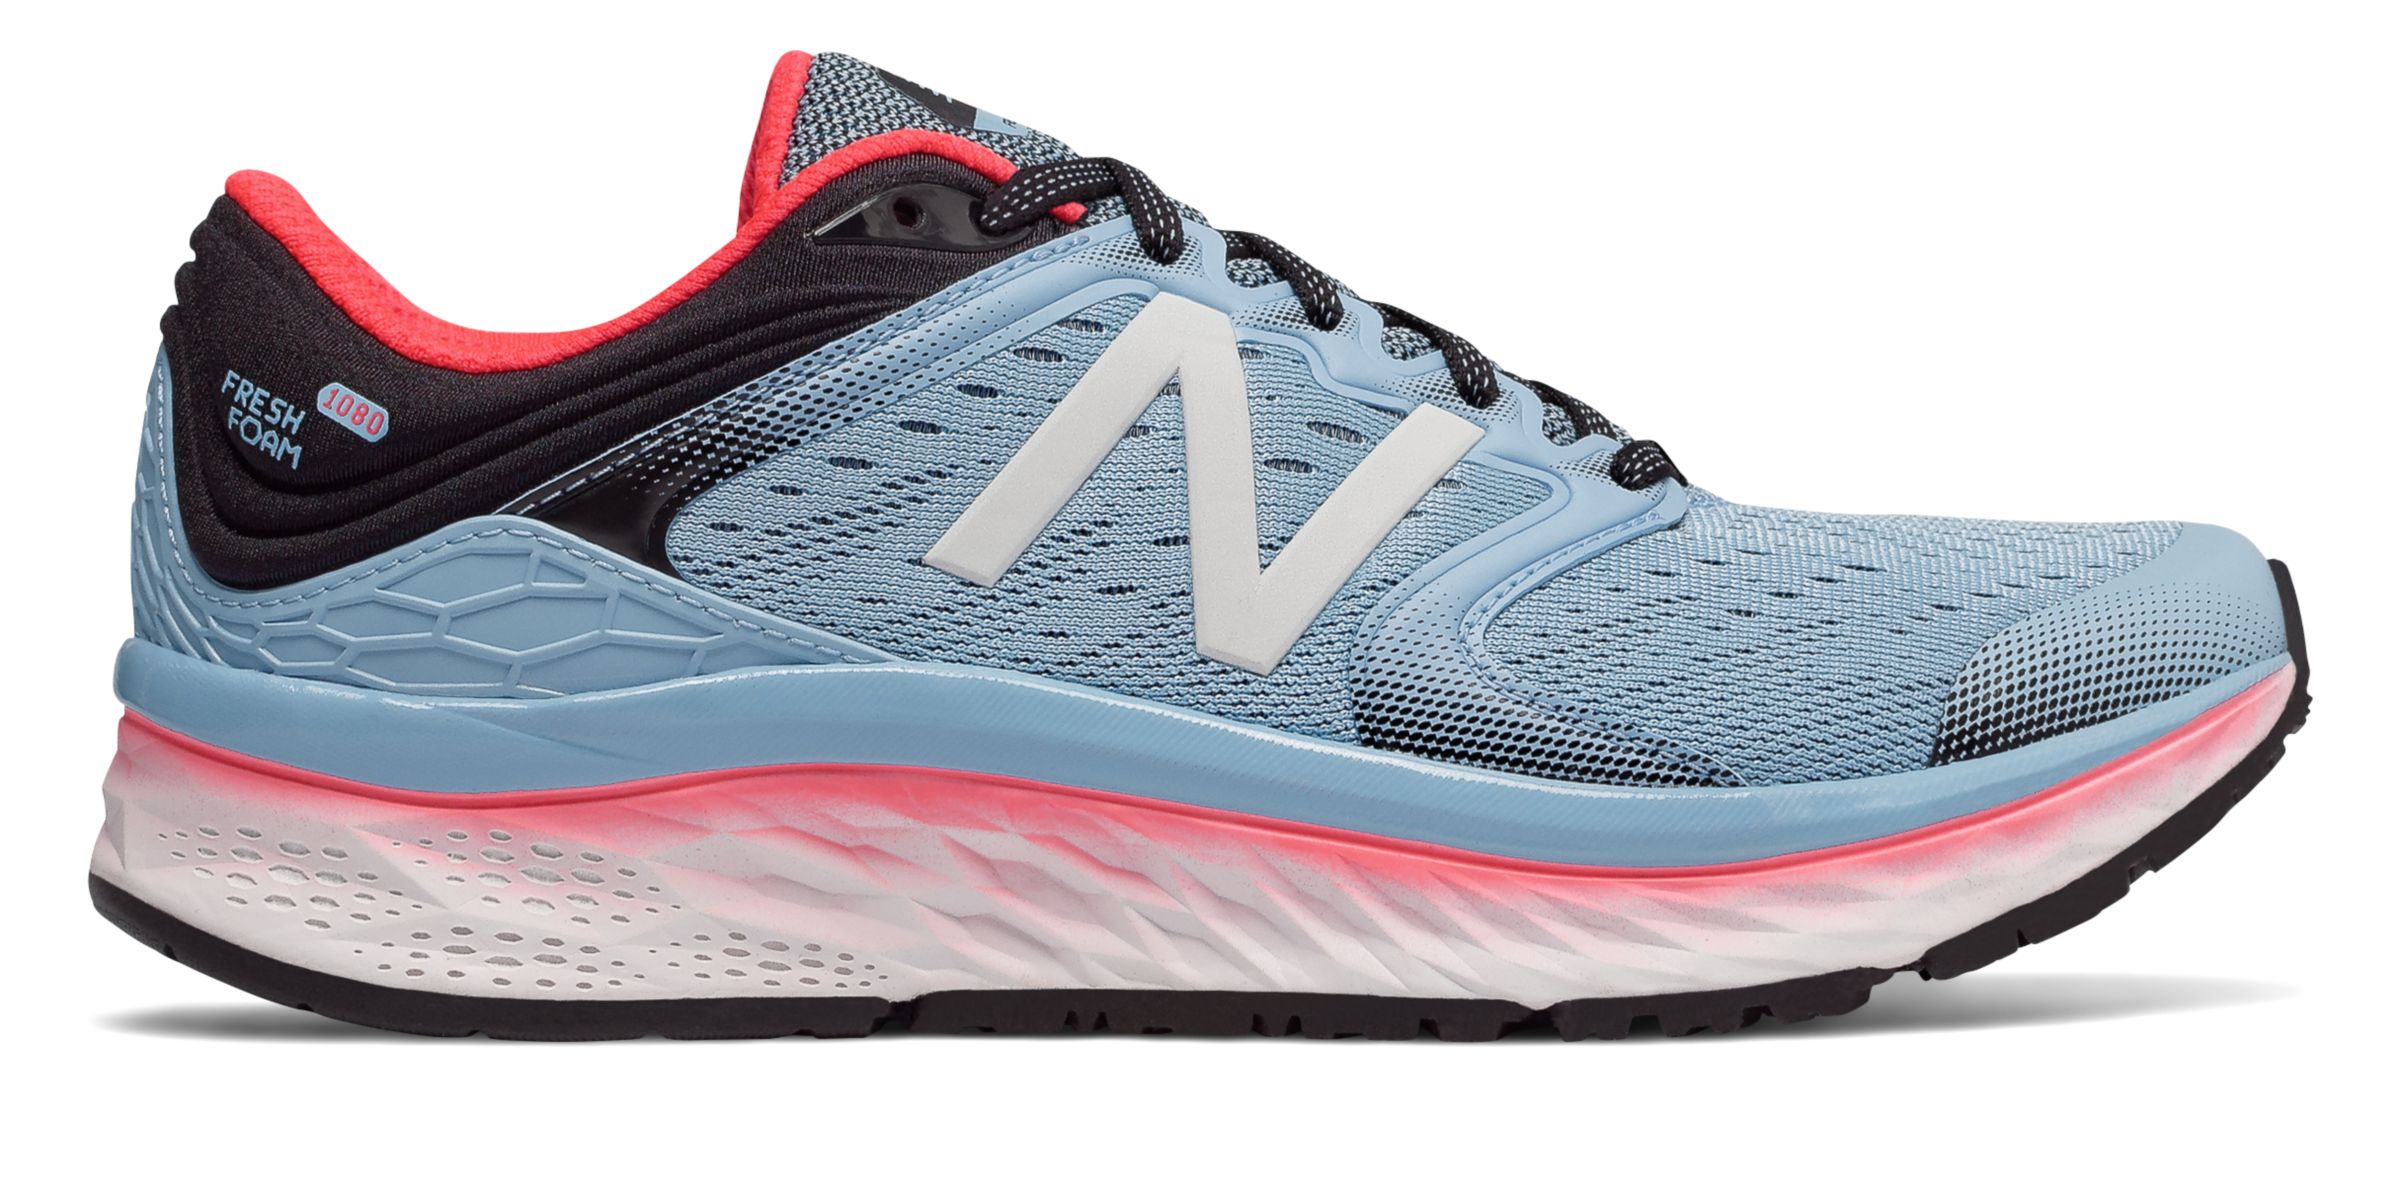 New Balance W1080-V8 on Sale - Discounts Up to 50% Off on W1080CS8 at Joe's New  Balance Outlet